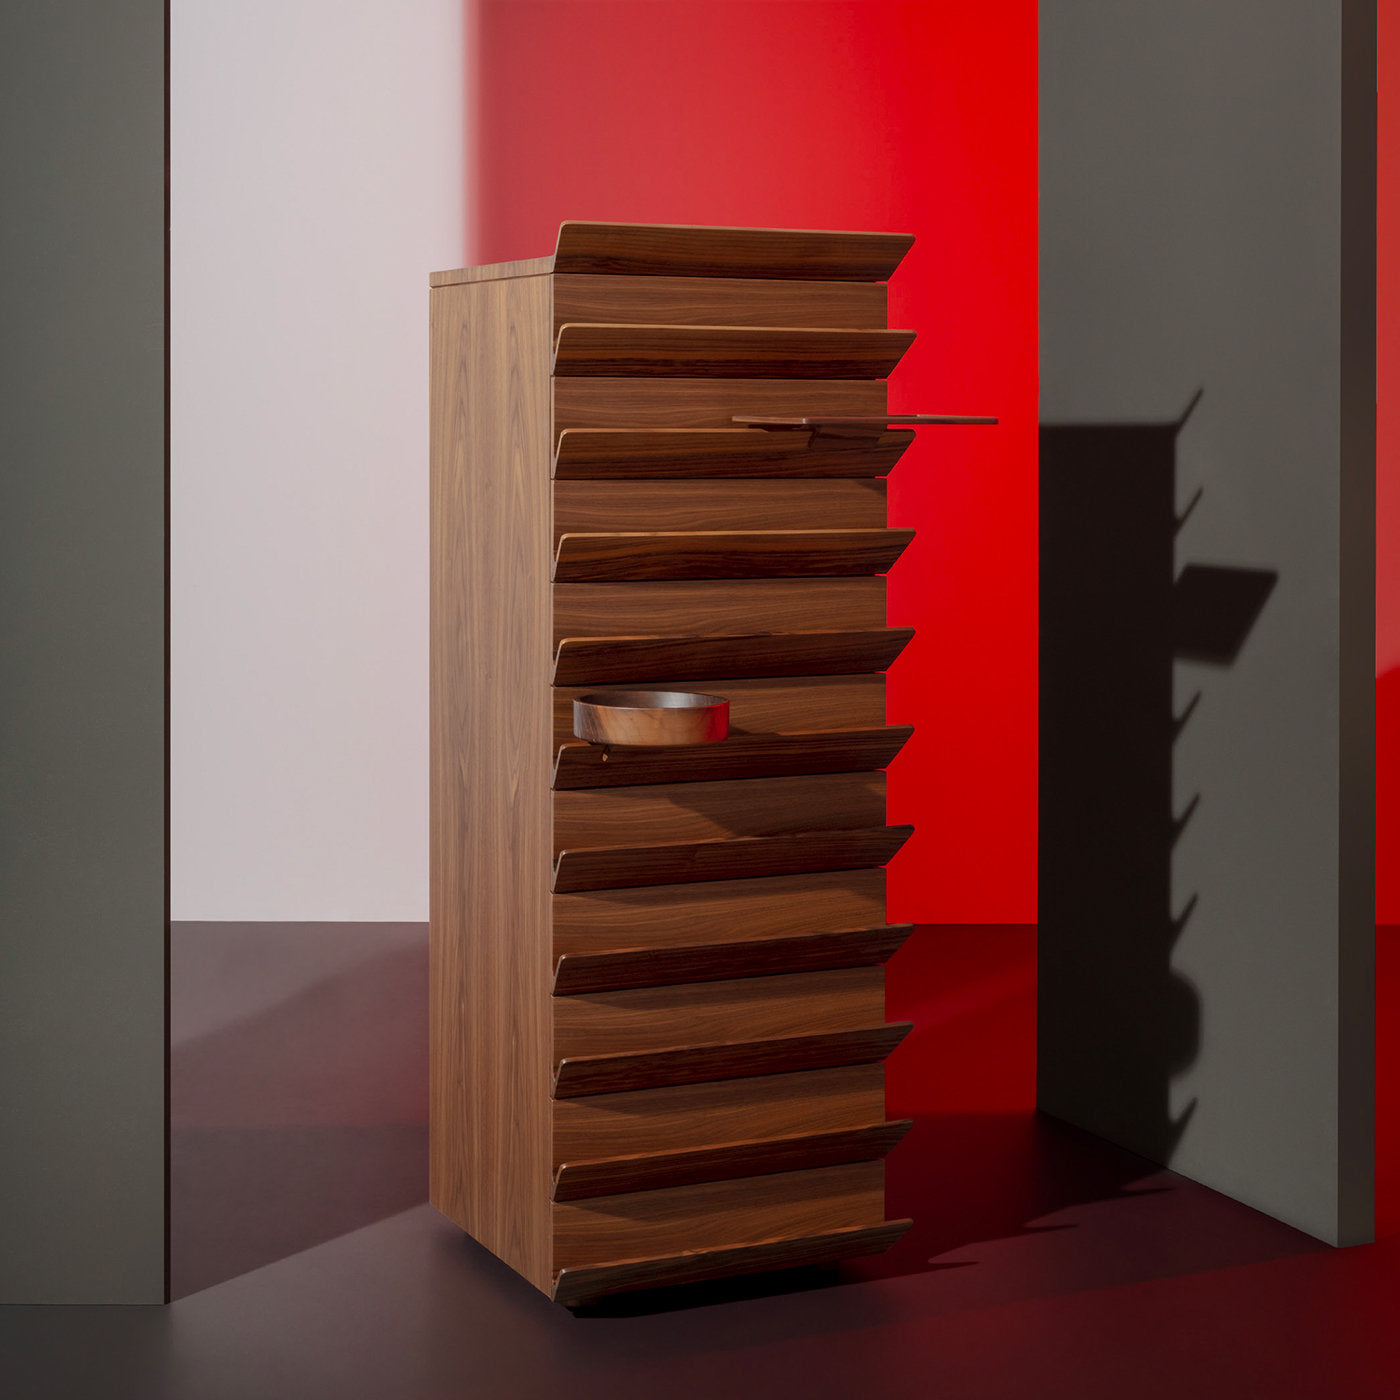 Overlooking Chest of Drawers by Lorenzo Damiani - Alternative view 1